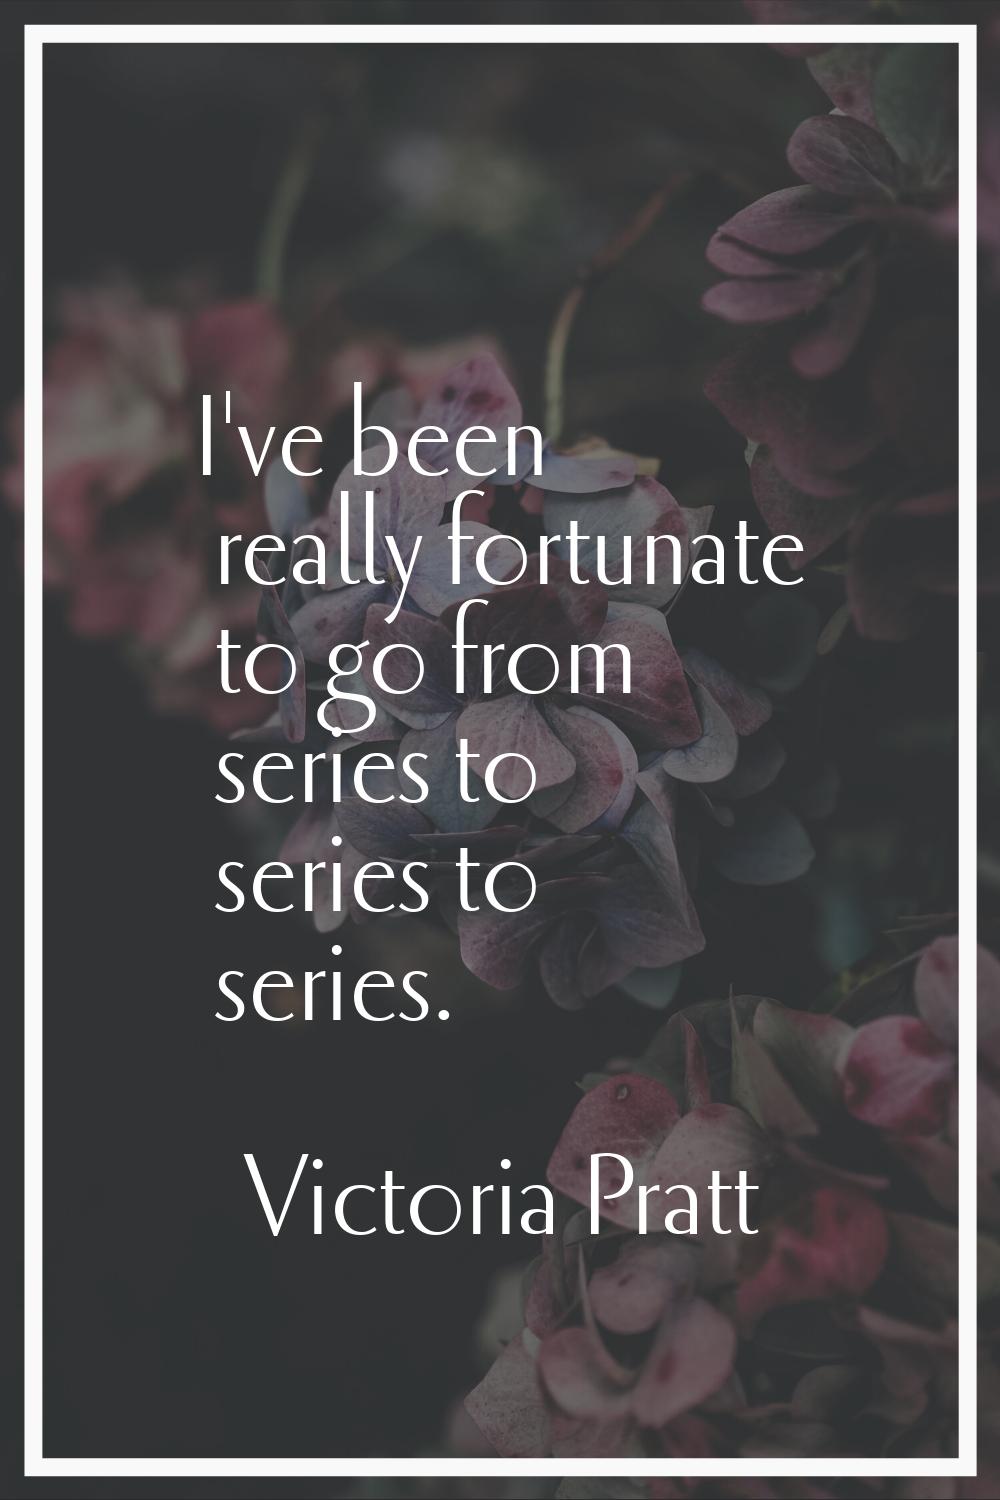 I've been really fortunate to go from series to series to series.